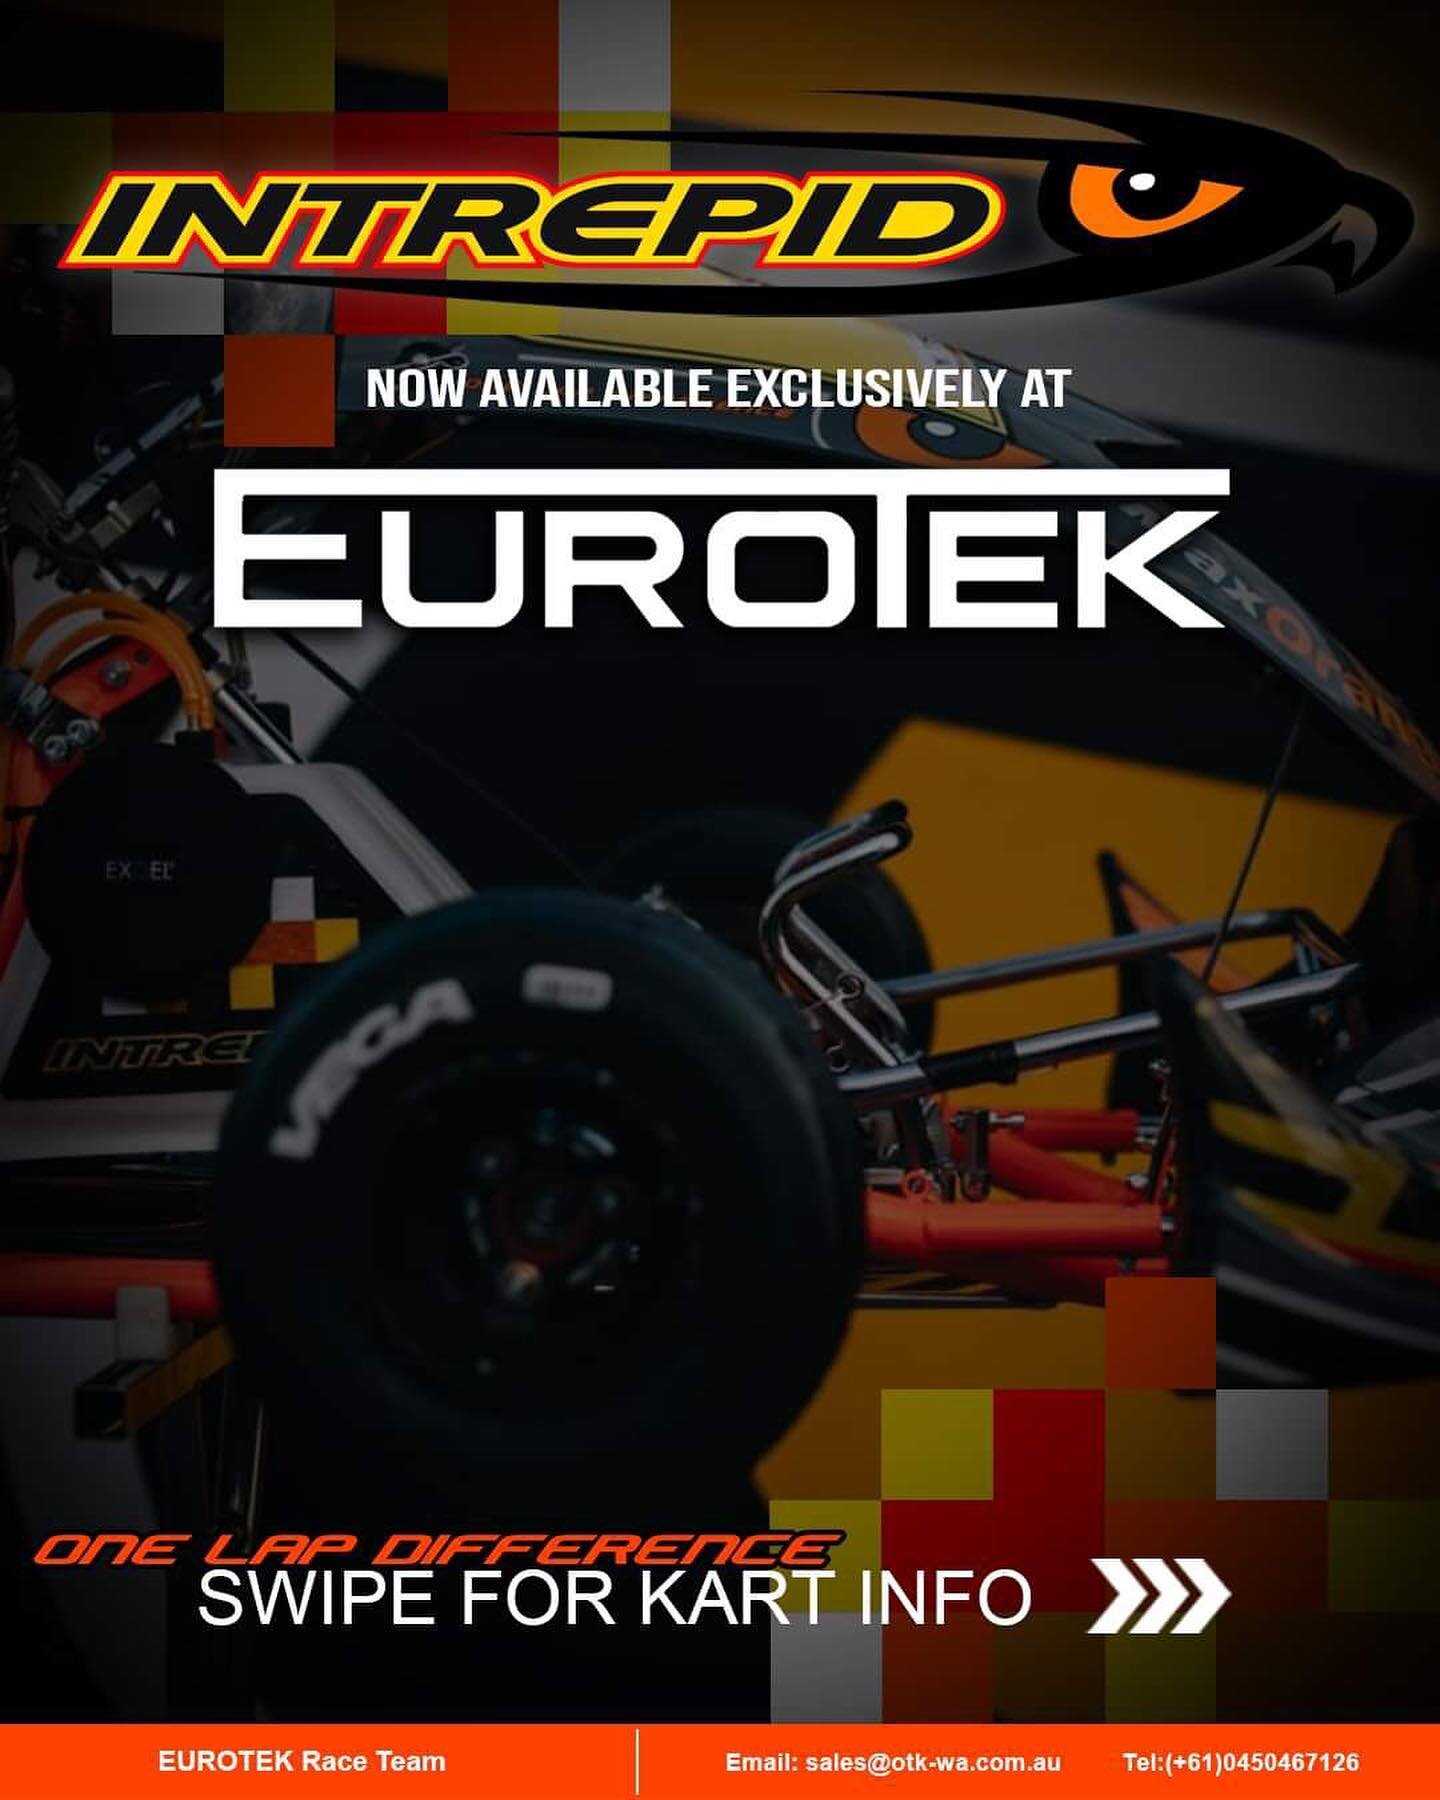 Details of the 2024 INTREPID DRIVER PROGRAM AUSTRALIA coming soon.

Join the Program and order your new INTREPID ready for 2024.

#eurotek #intrepid #maxorange #onelapdifference #cruiser #speedy #karting #fun #winning #keeppushing #forevertuning